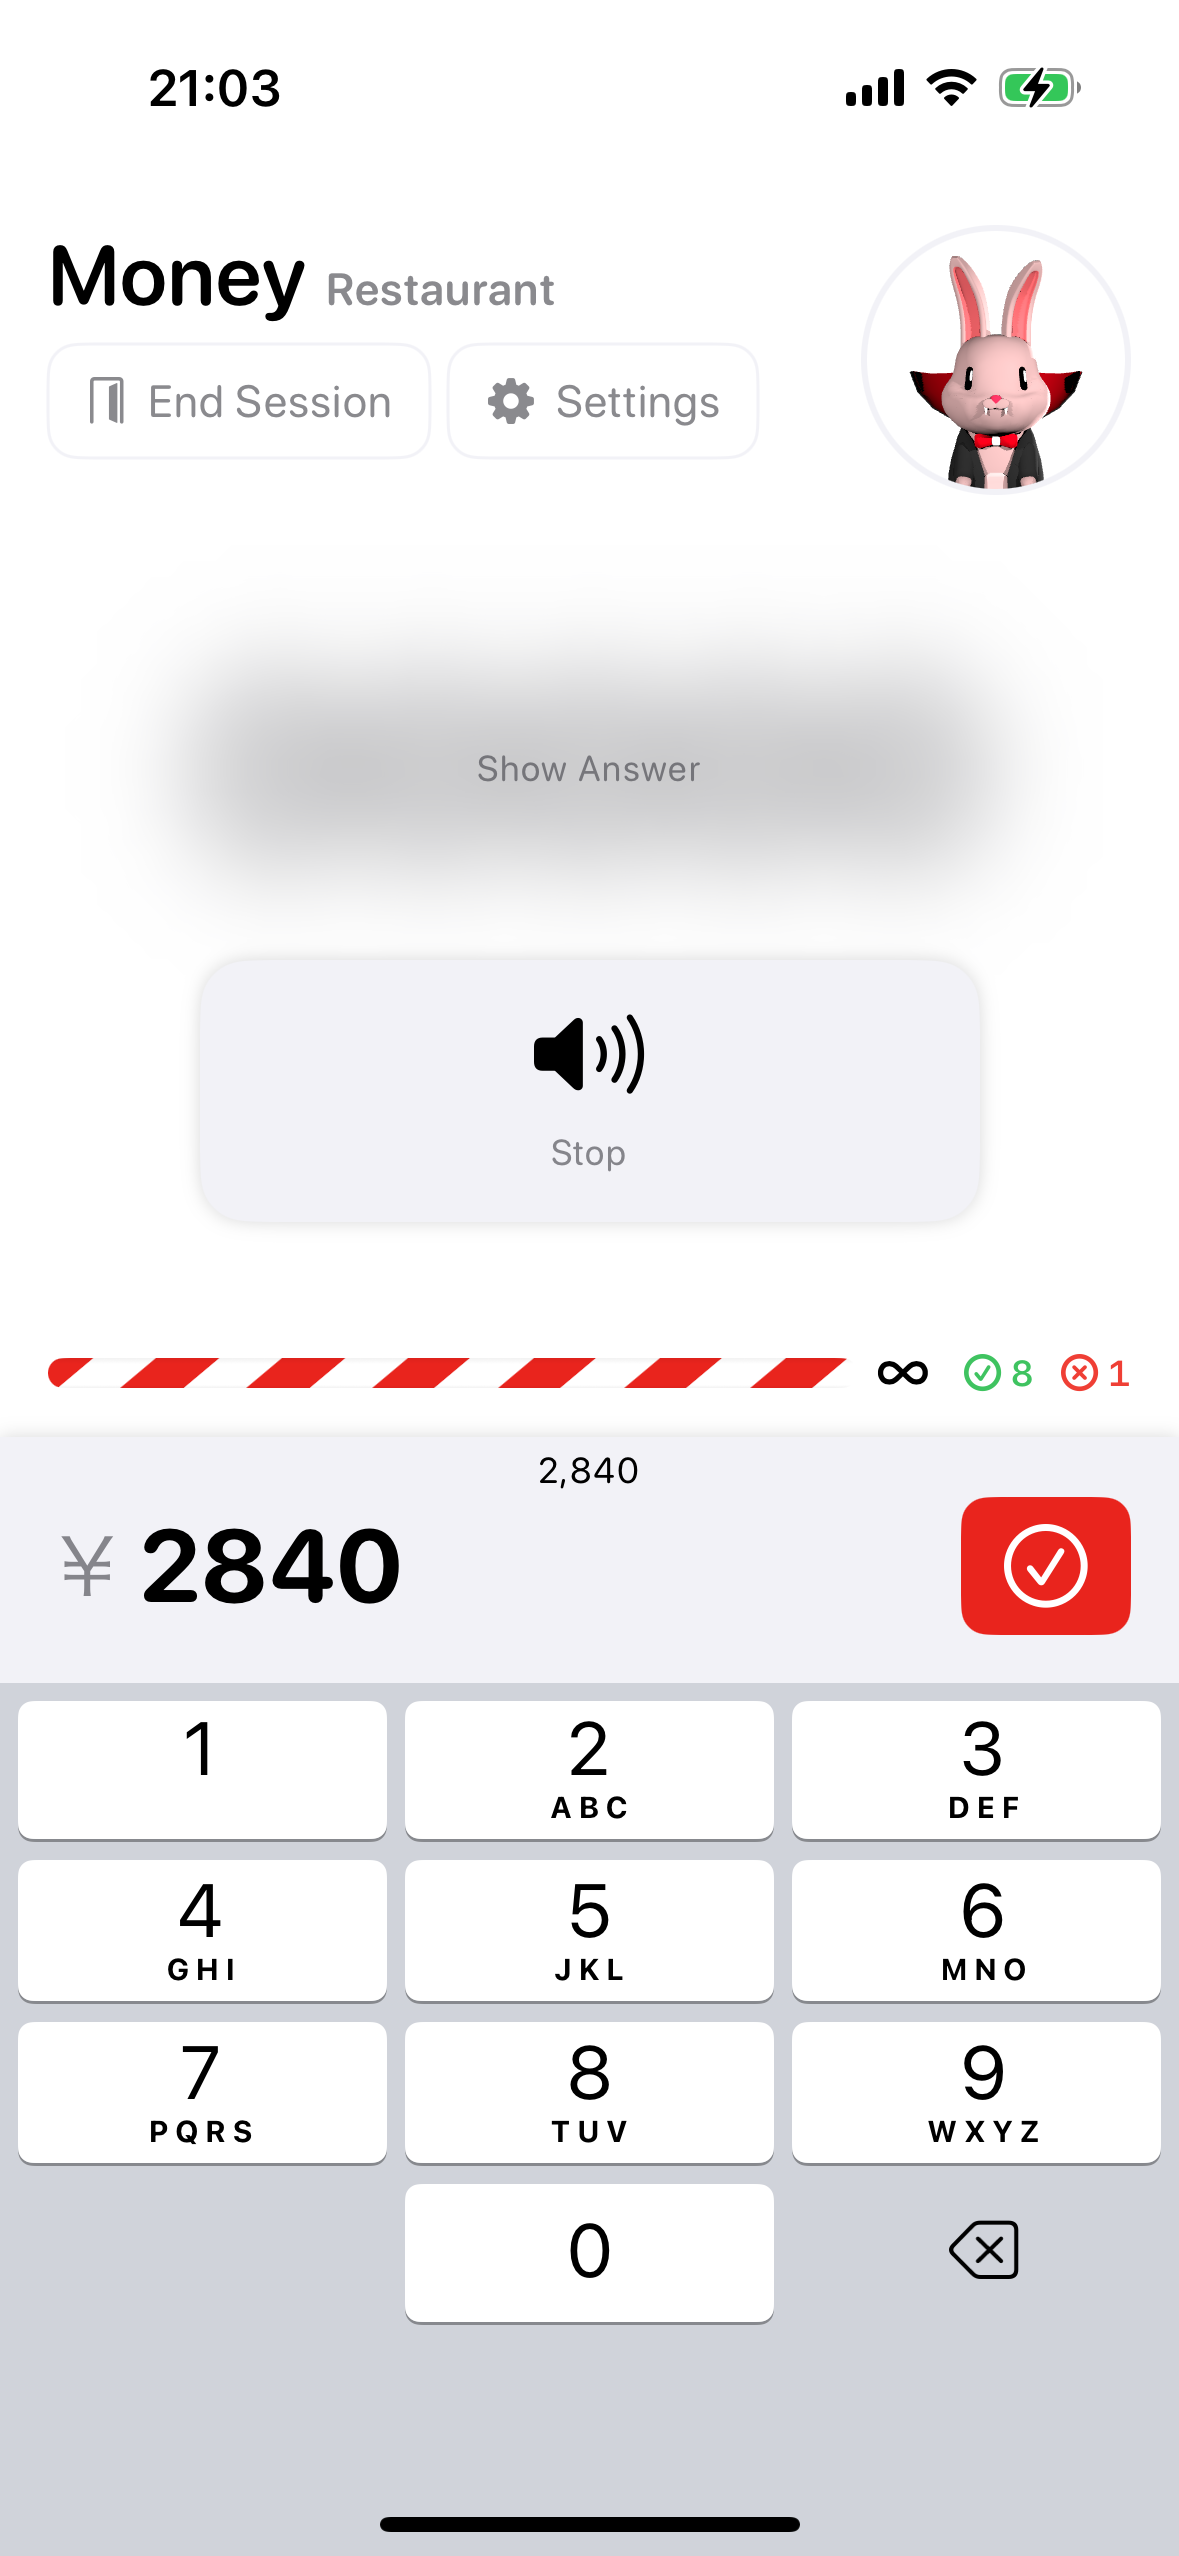 Updated design of the listening quiz for v1.1 to allow quicker access to ending the current session